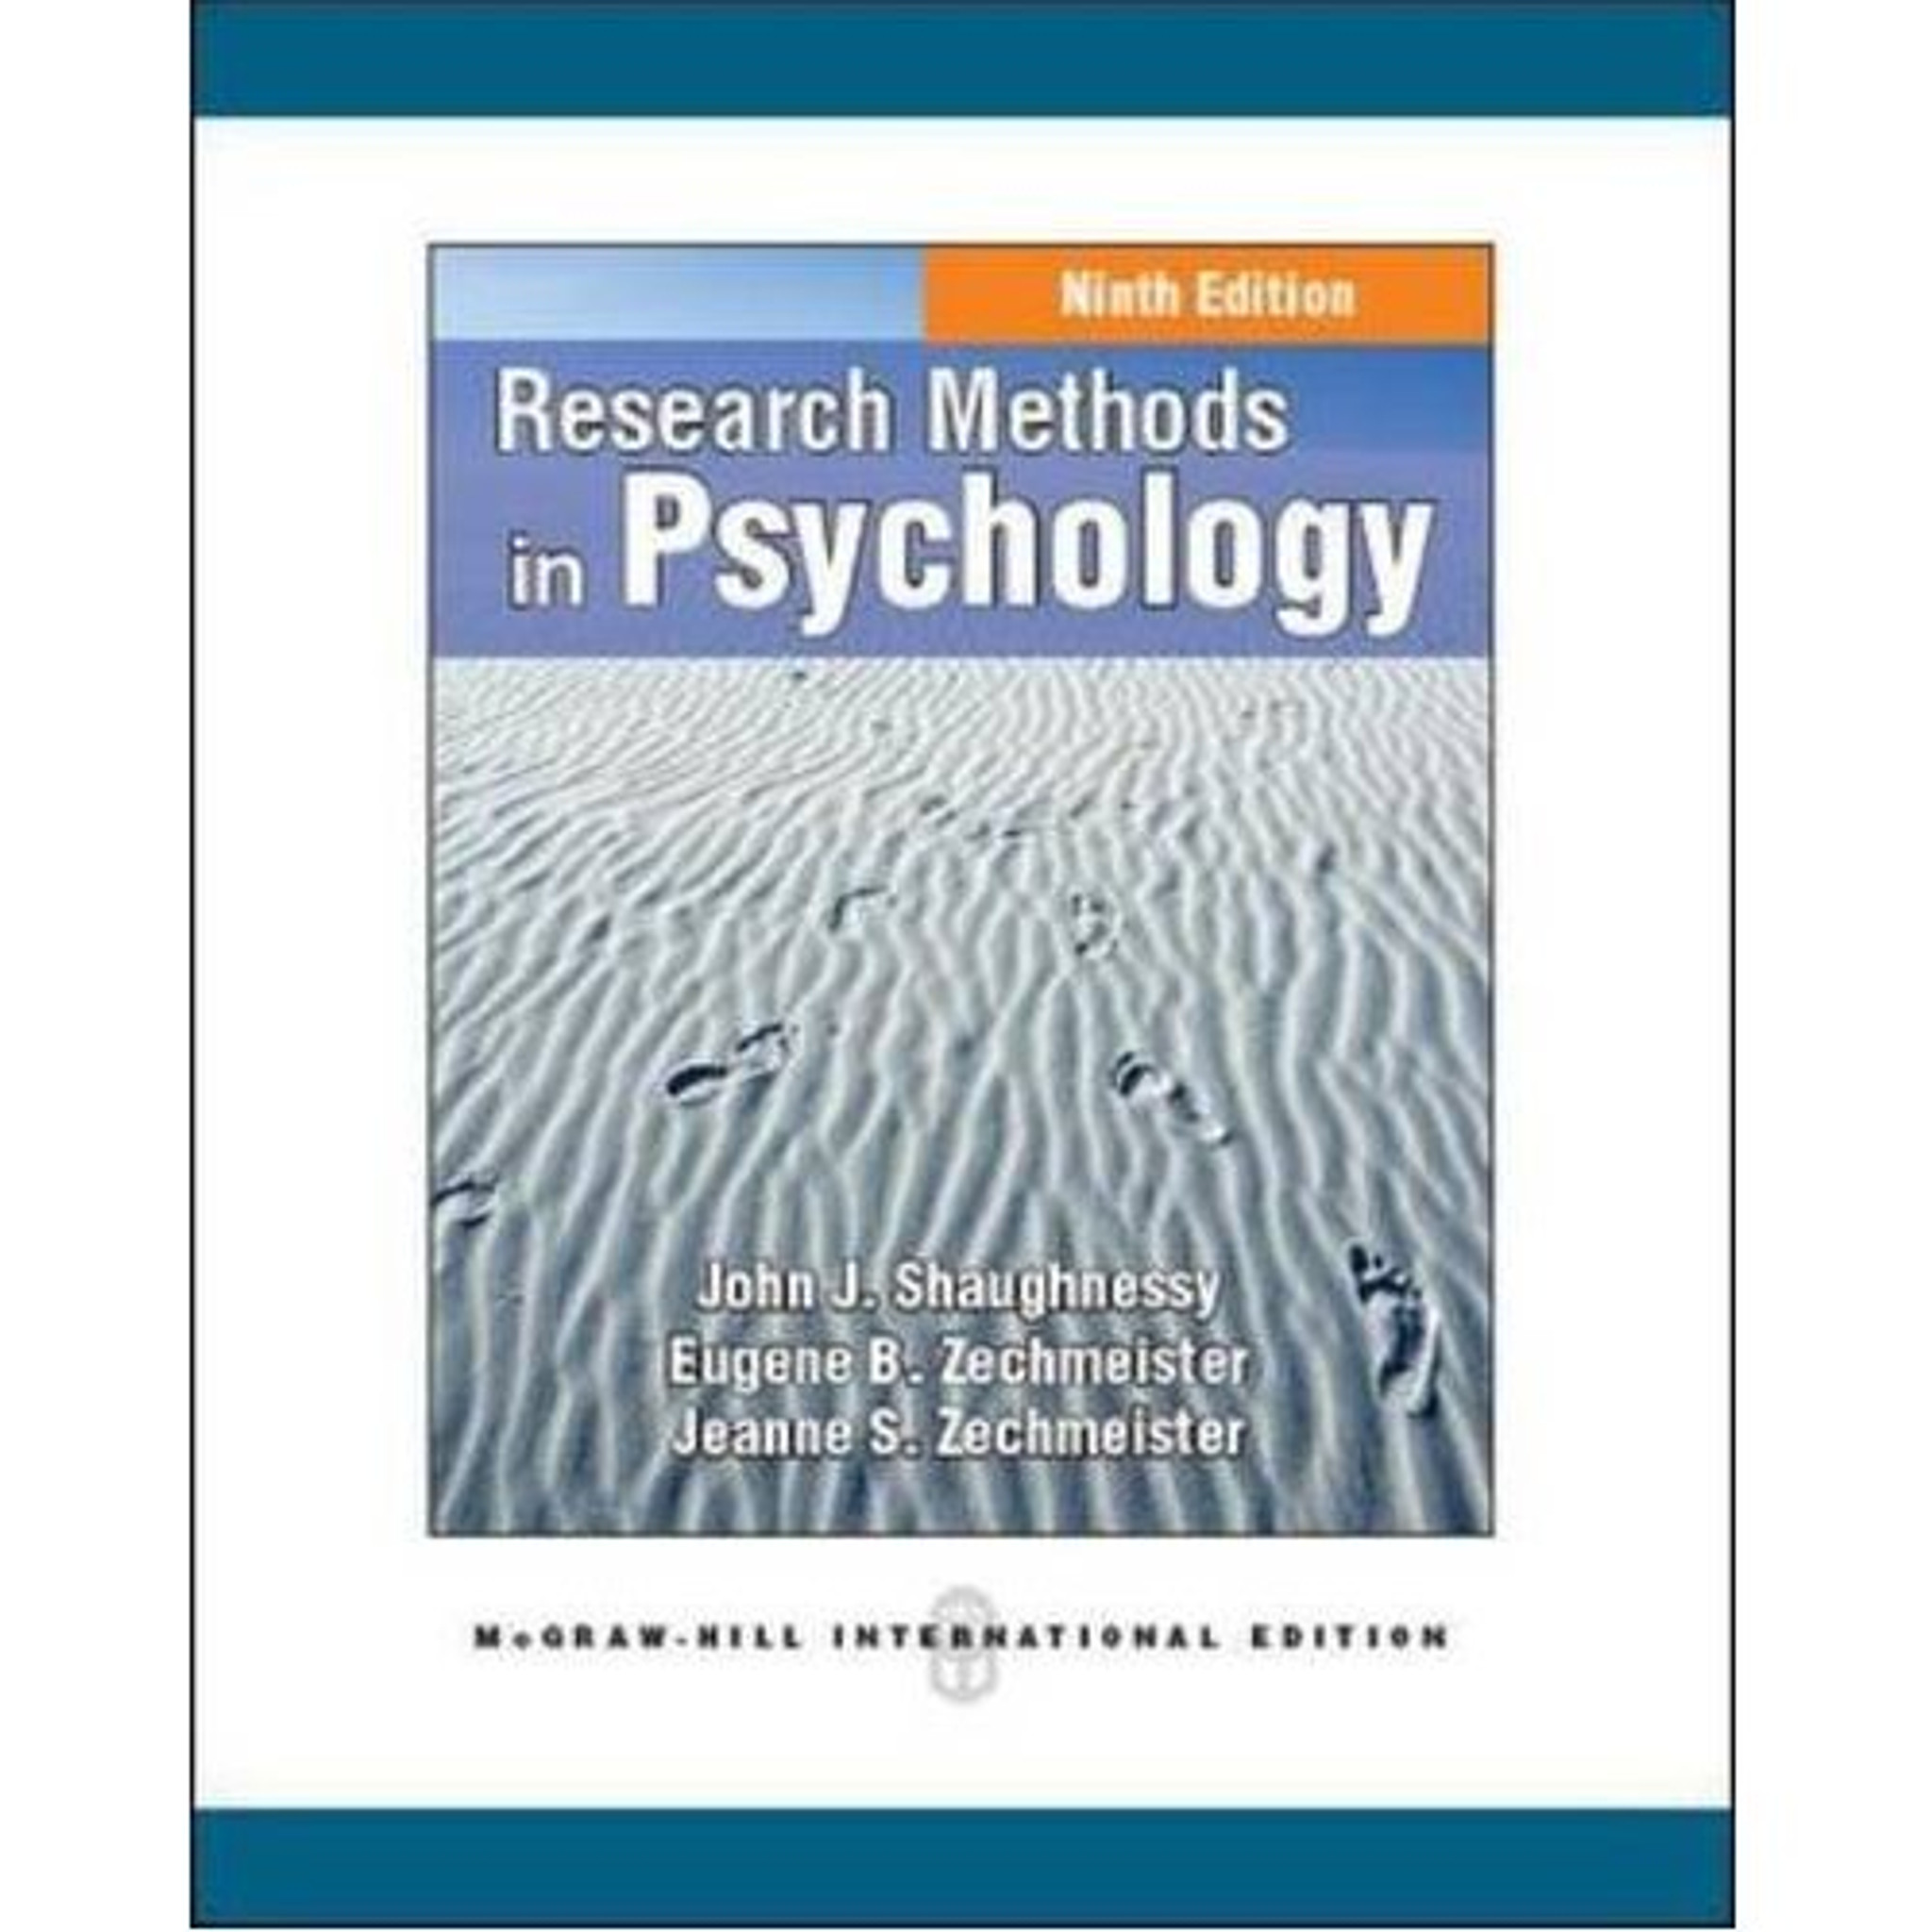 research methods in psychology mcgraw hill